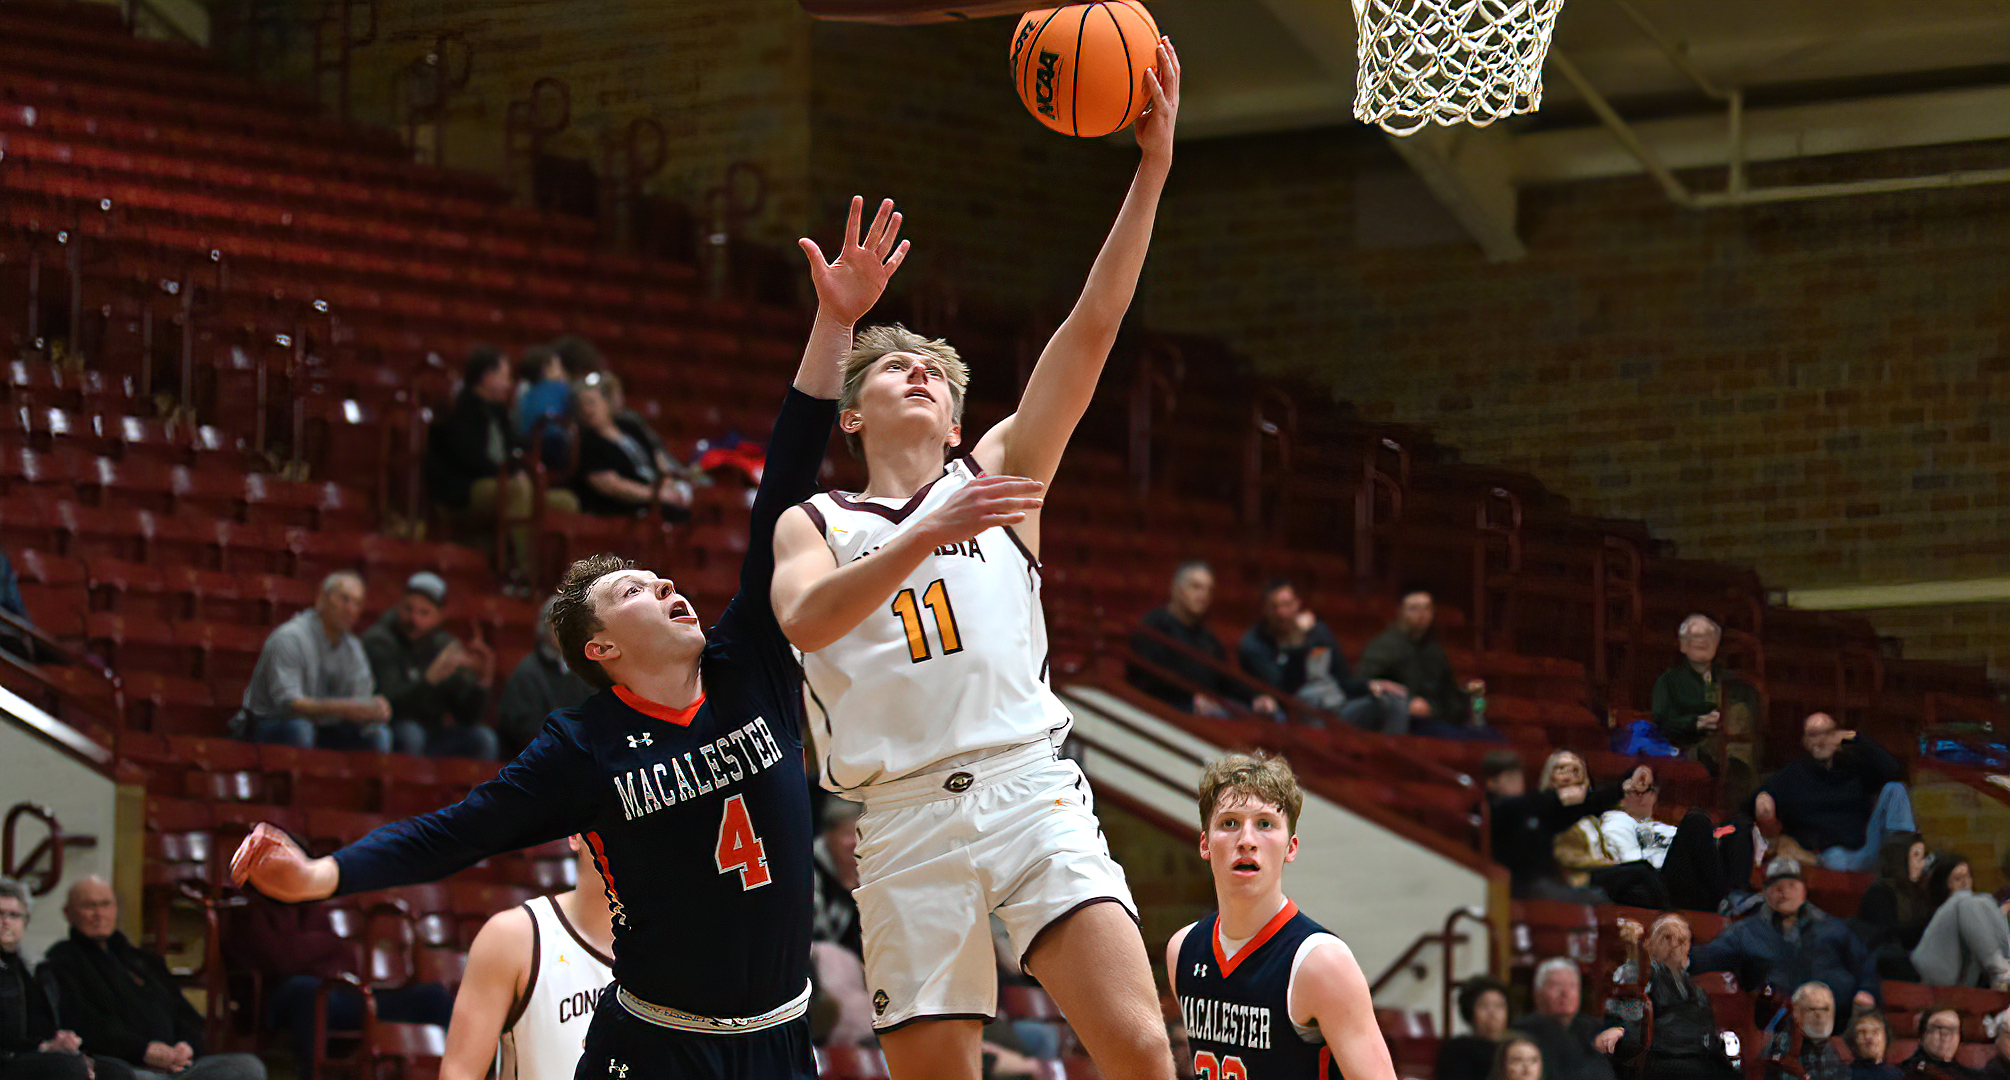 Peyton Belka goes past a Macalester defender to lay in two of his 14 points in the Cobbers' game with the Scots.